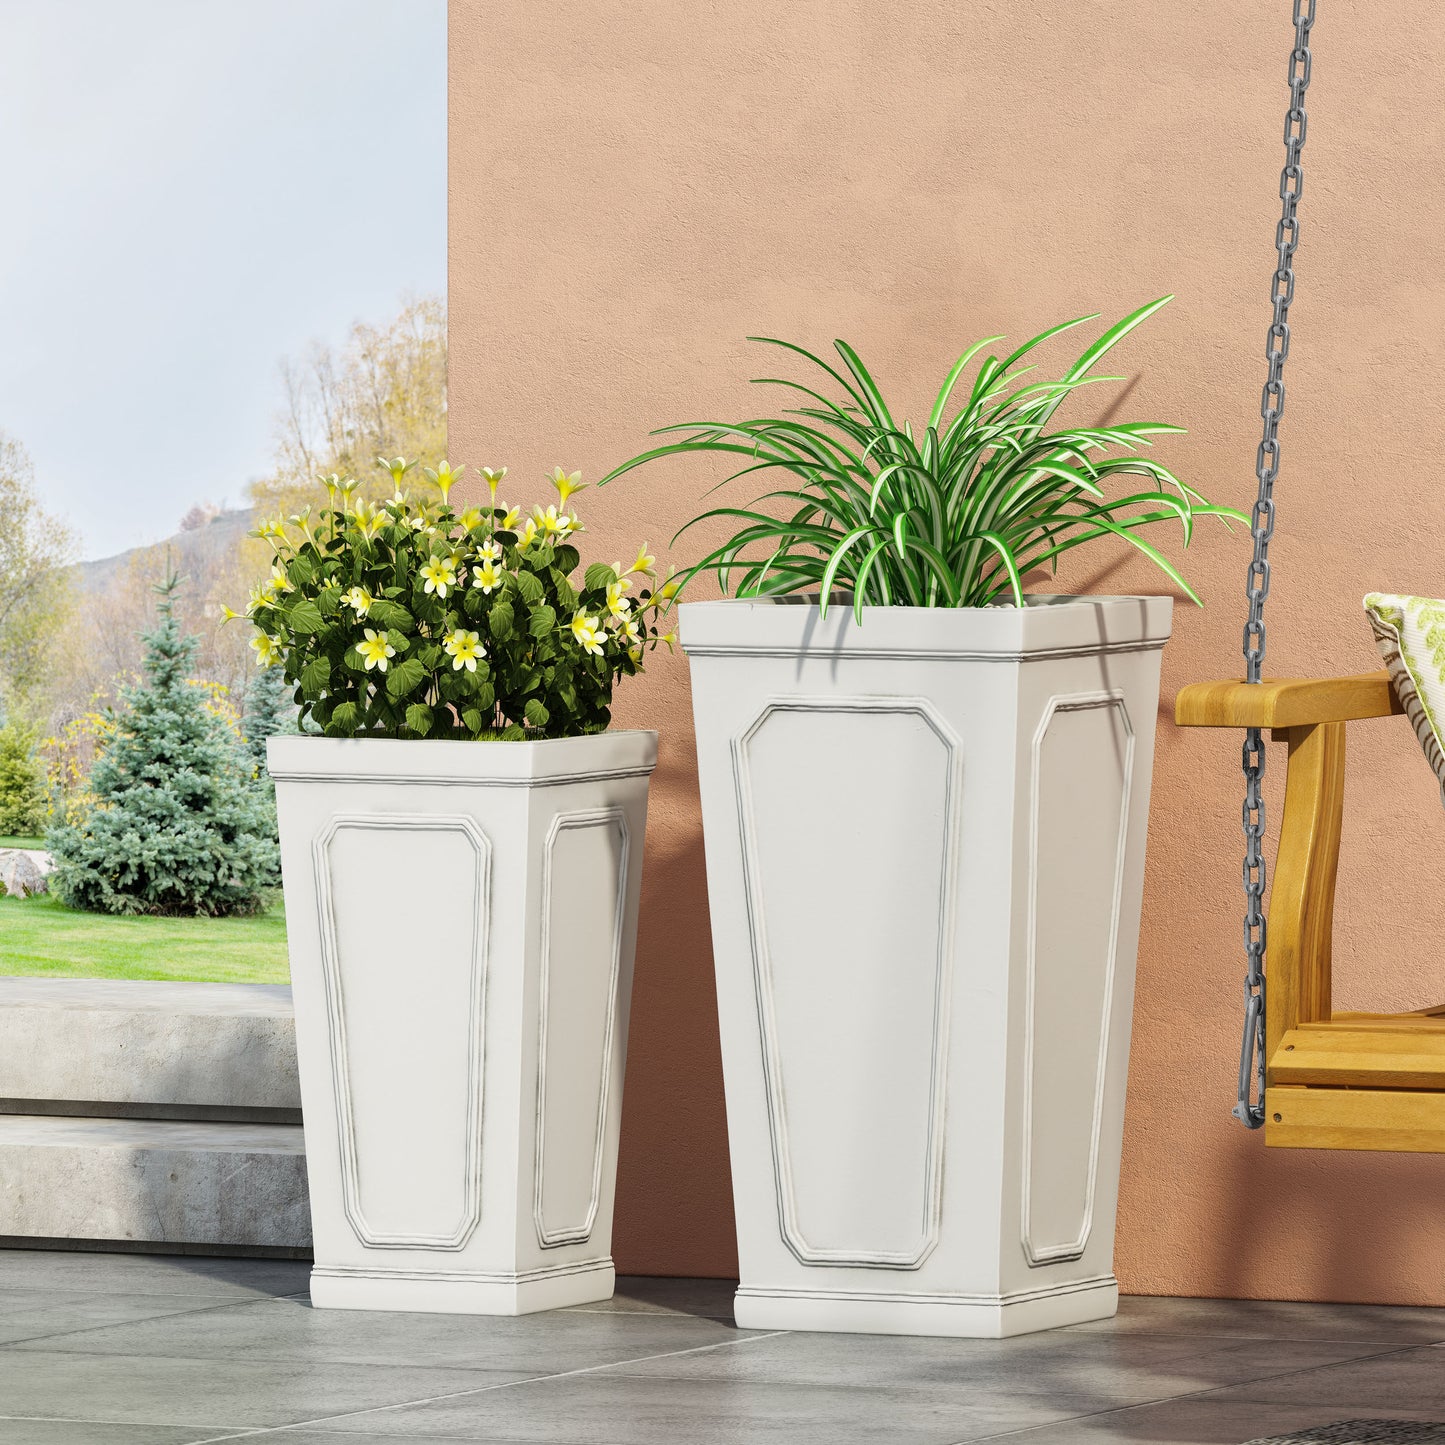 Greg Outdoor Medium and Large Cast Stone Tapered Planter Set, Antique White